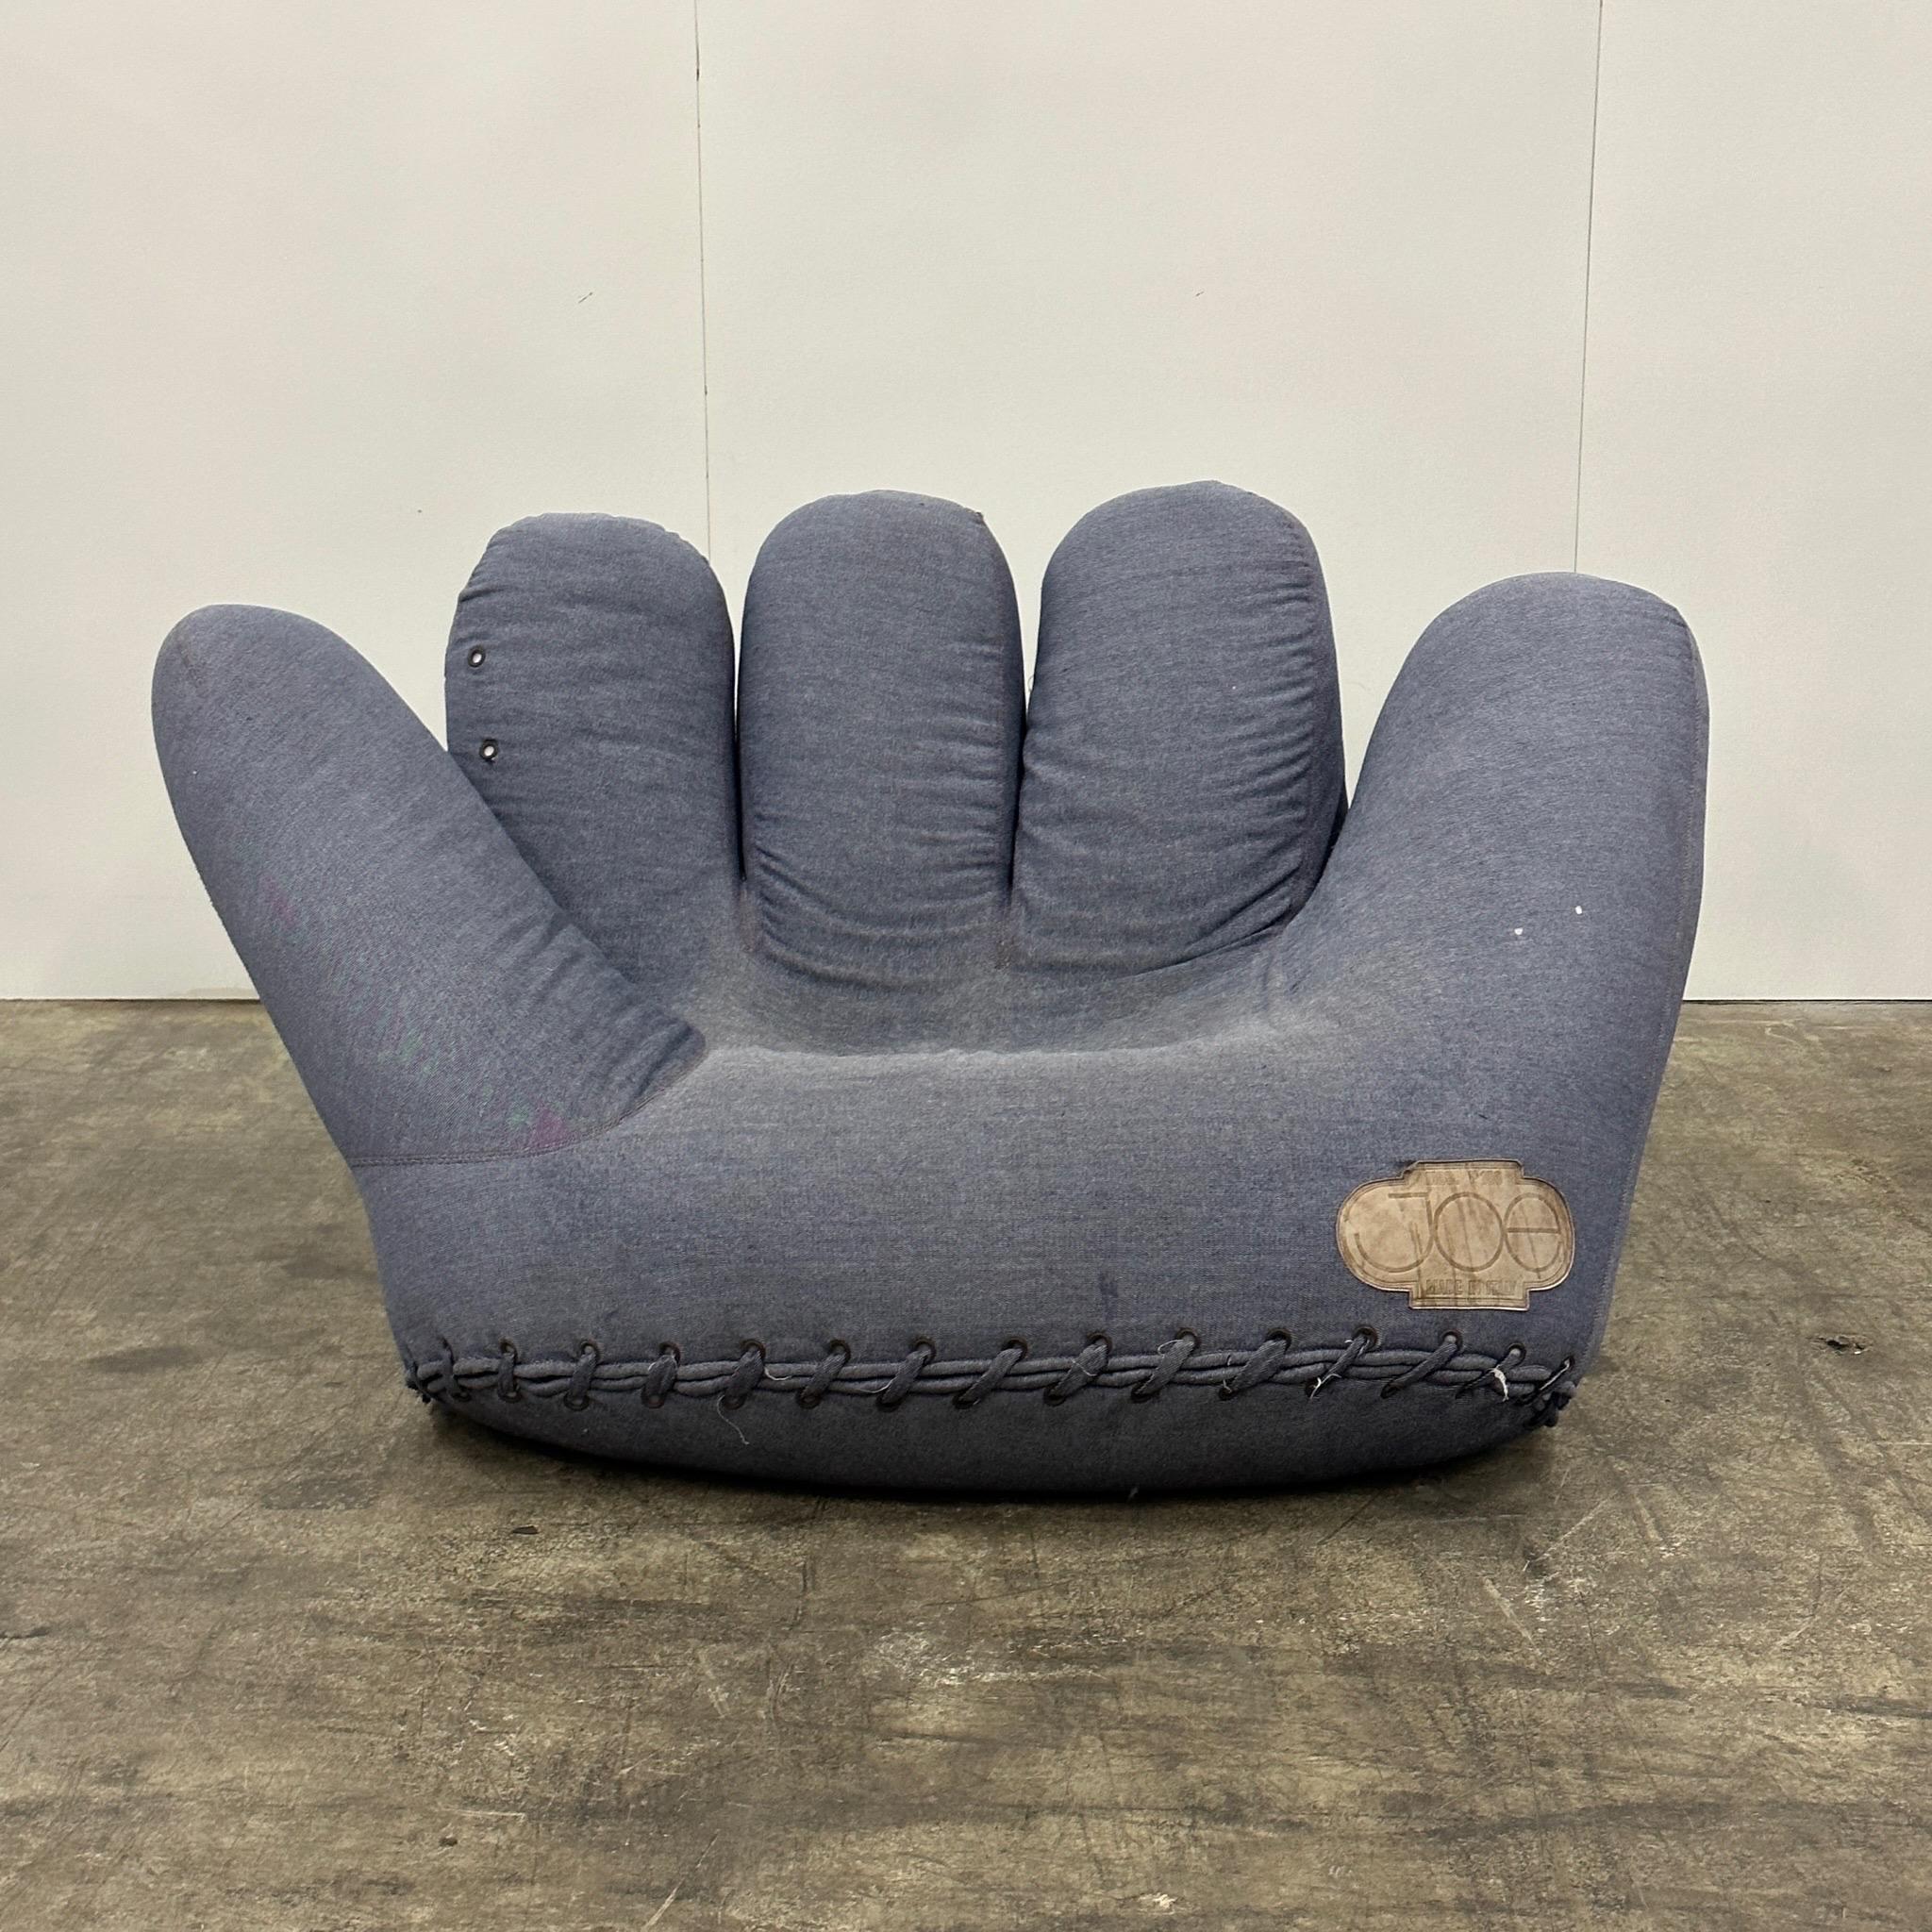 c. 1980s. Upholstered in original denim fabric. Signed on leather patch. Made in Italy.